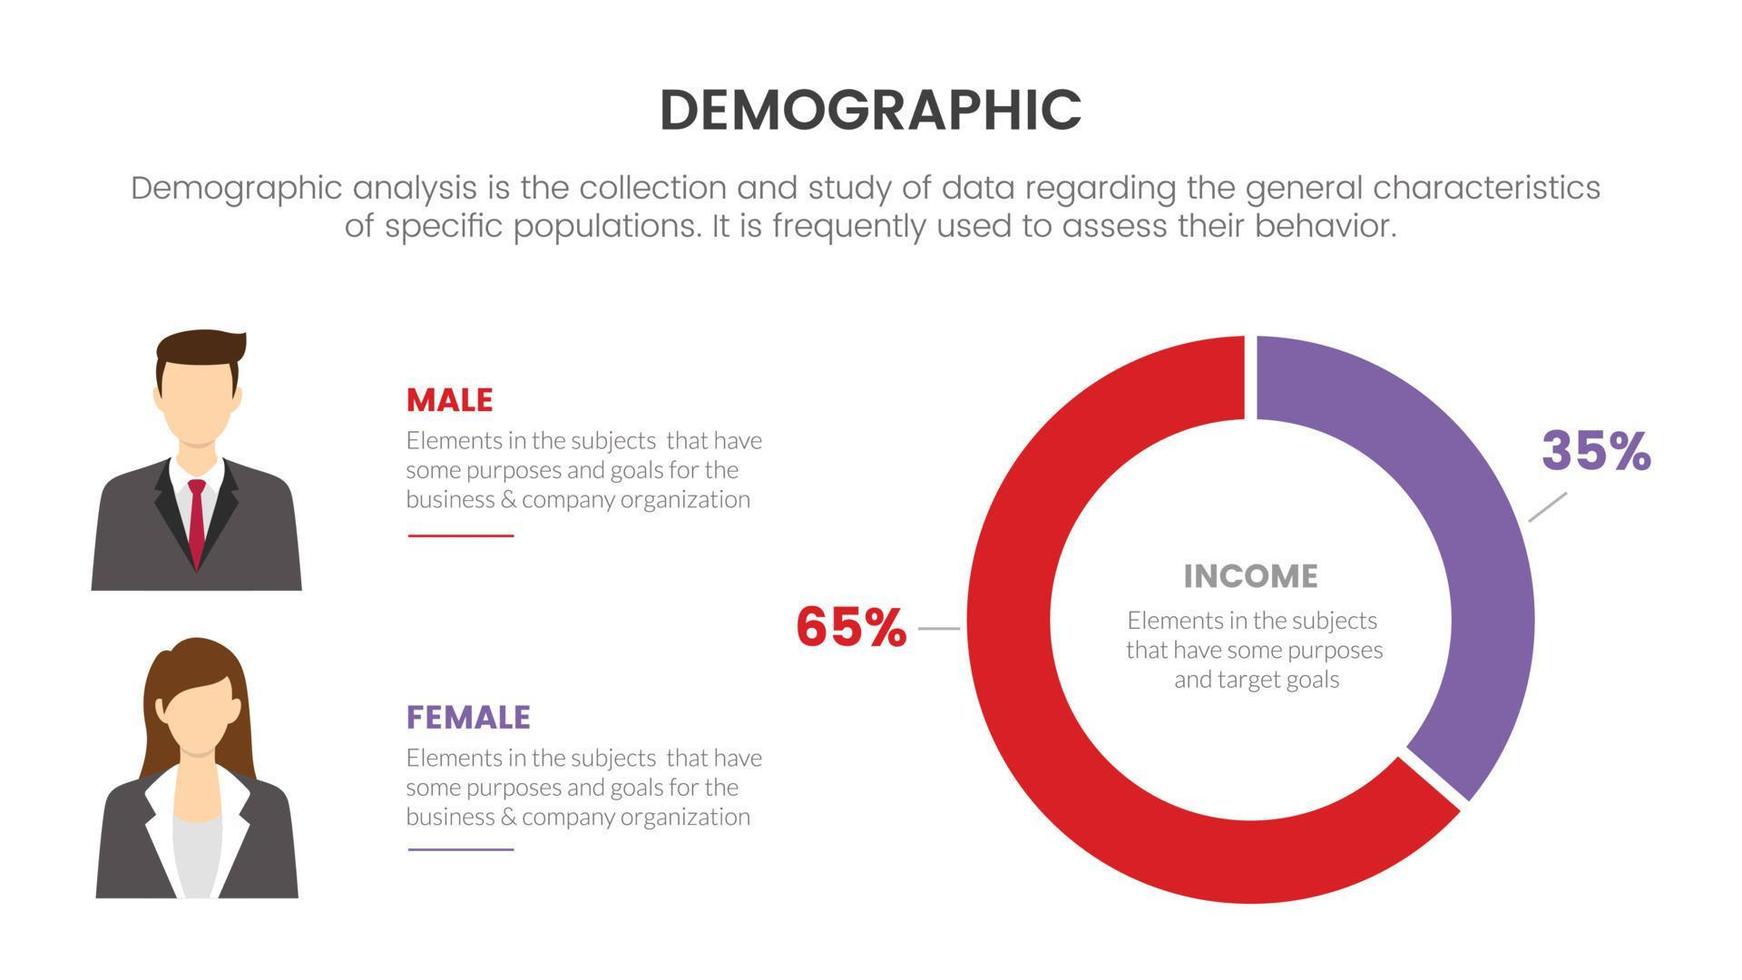 male and female compare demography infographic concept for slide presentation with 2 point list and circle data percentage vector